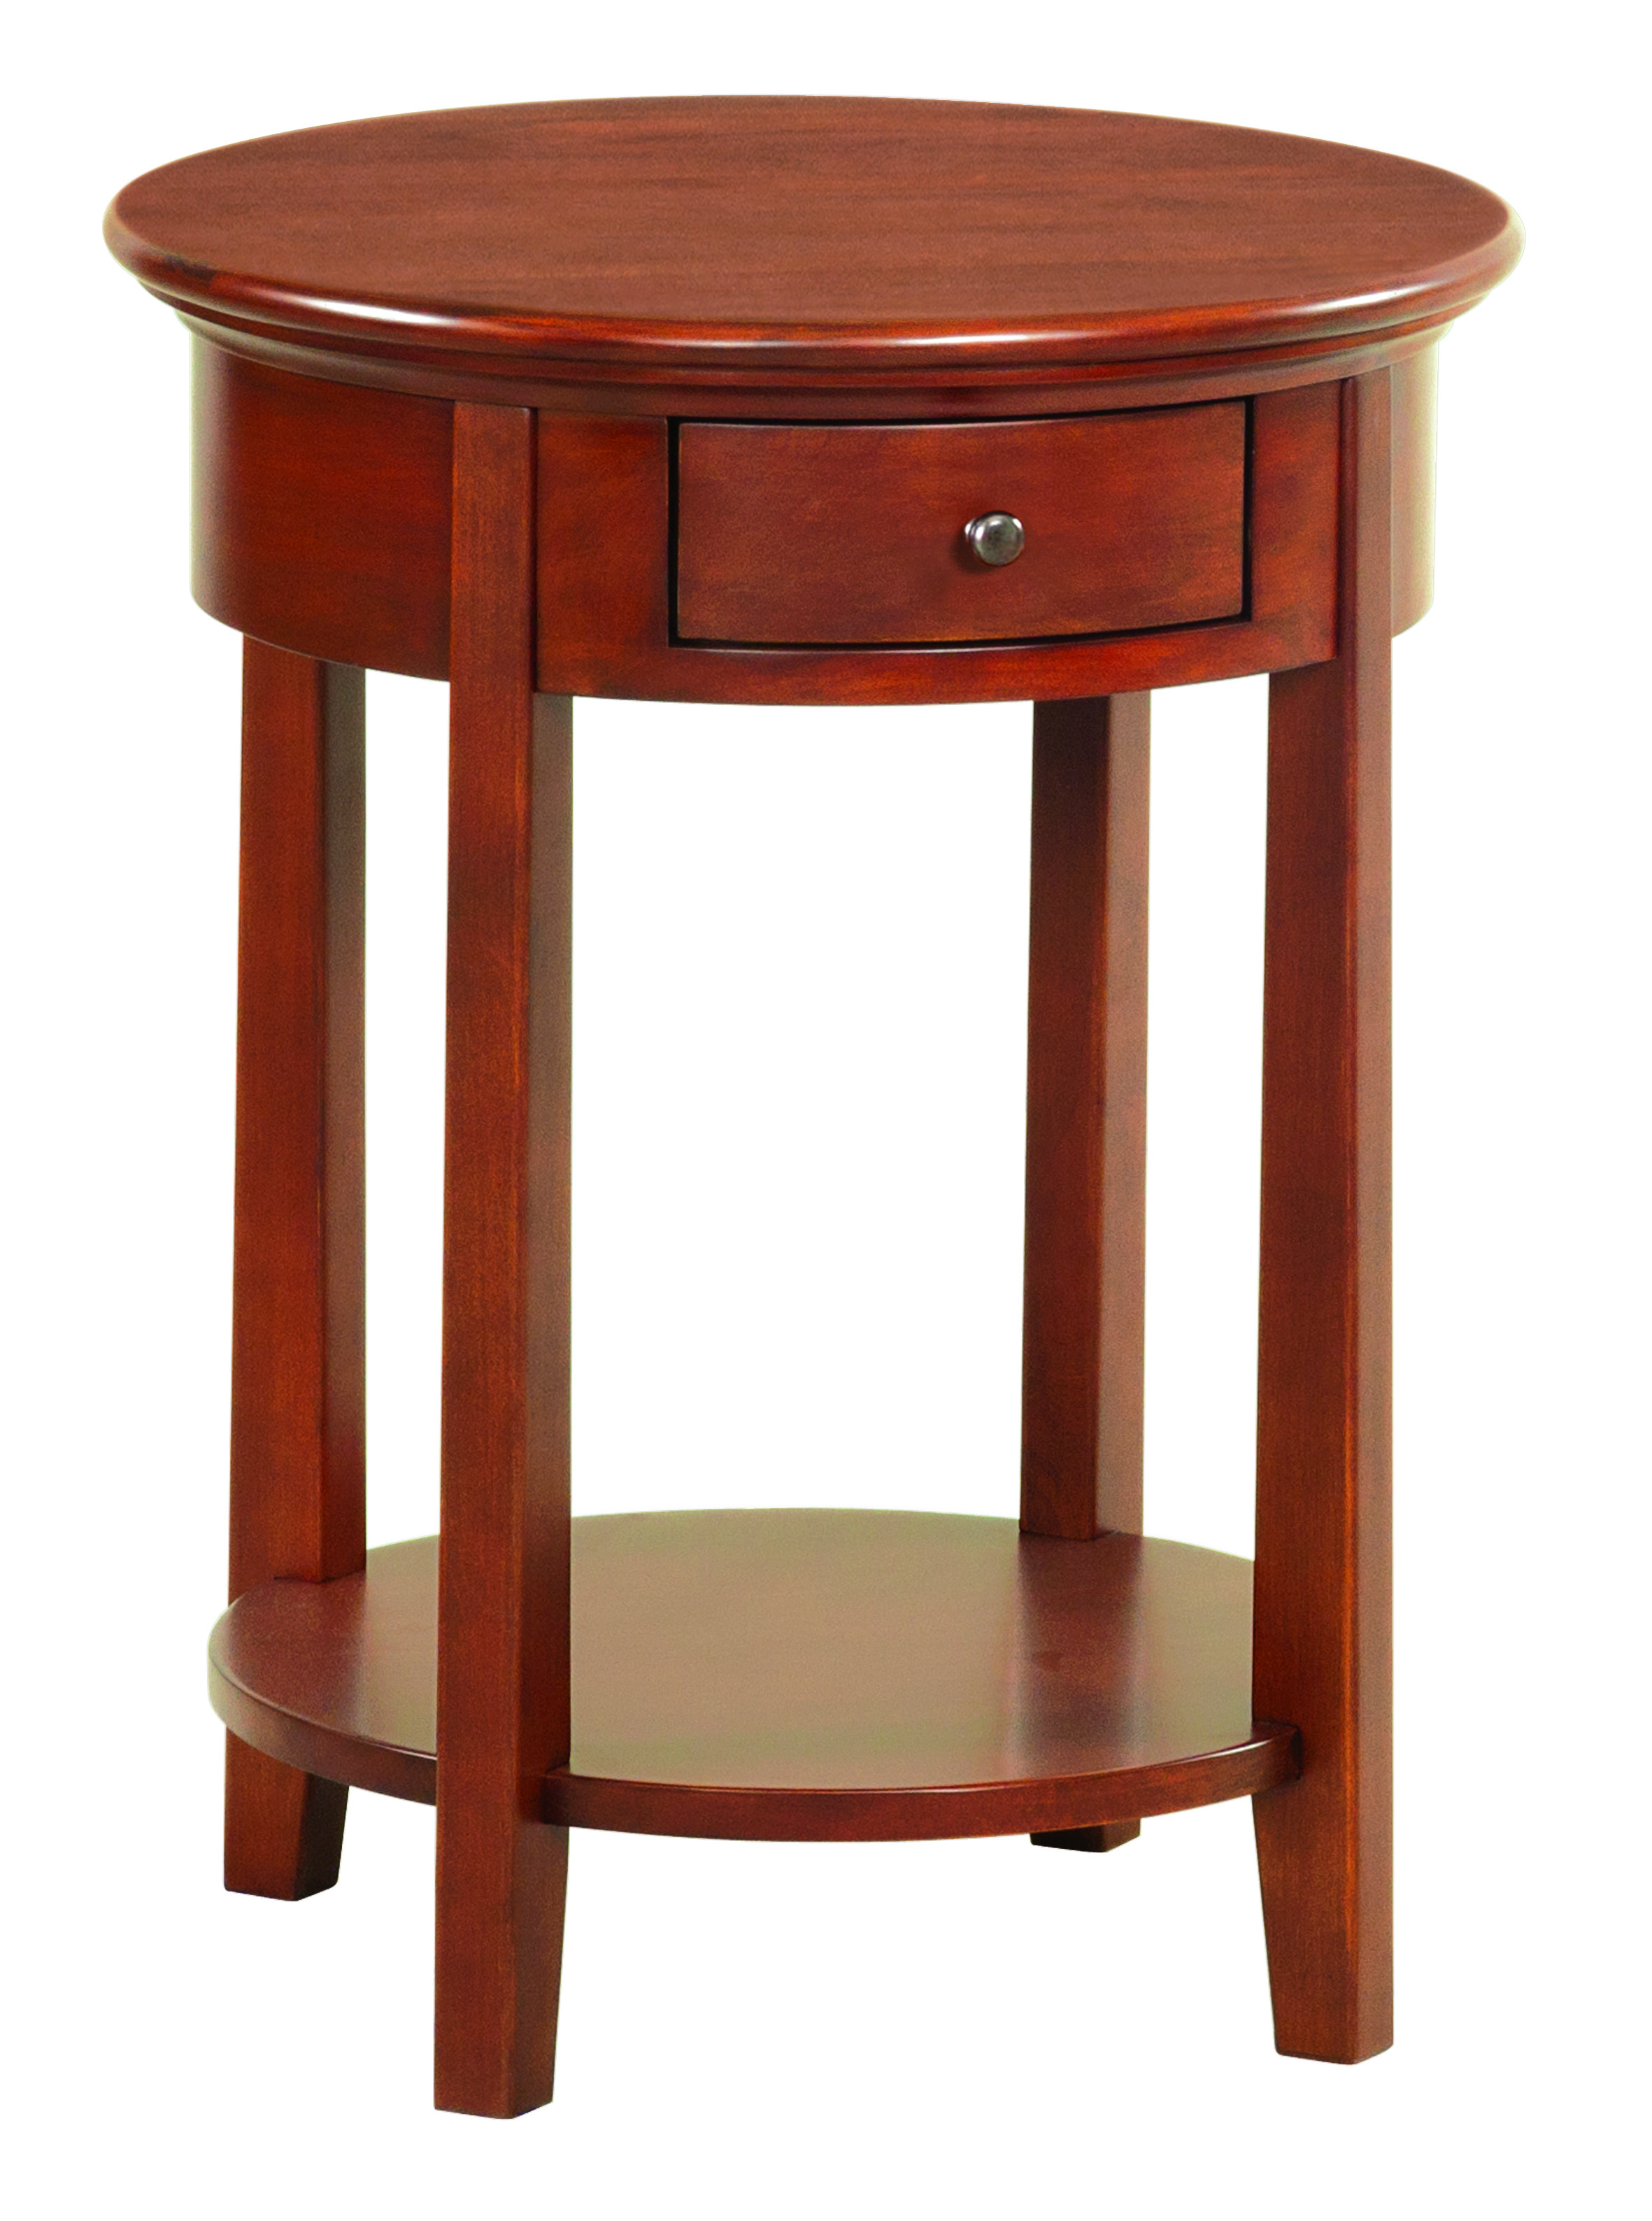 3495 Mckenzie Round Side Table With, Vintage Round Side Table With Drawer